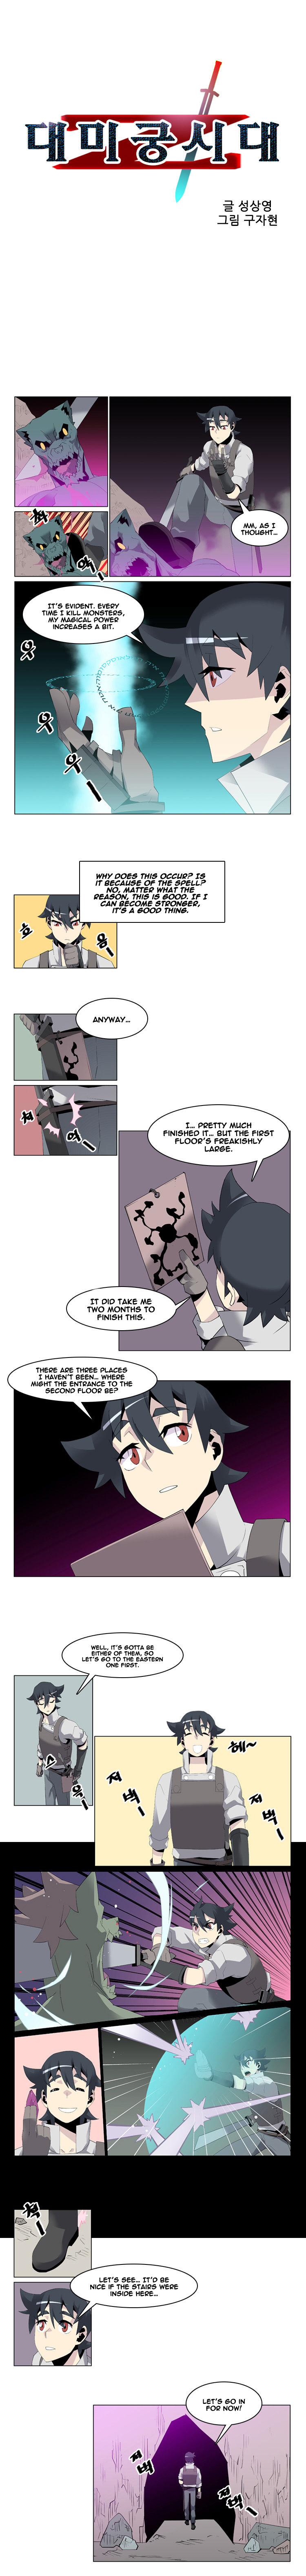 Maze Age Z Chapter 8 Page 1